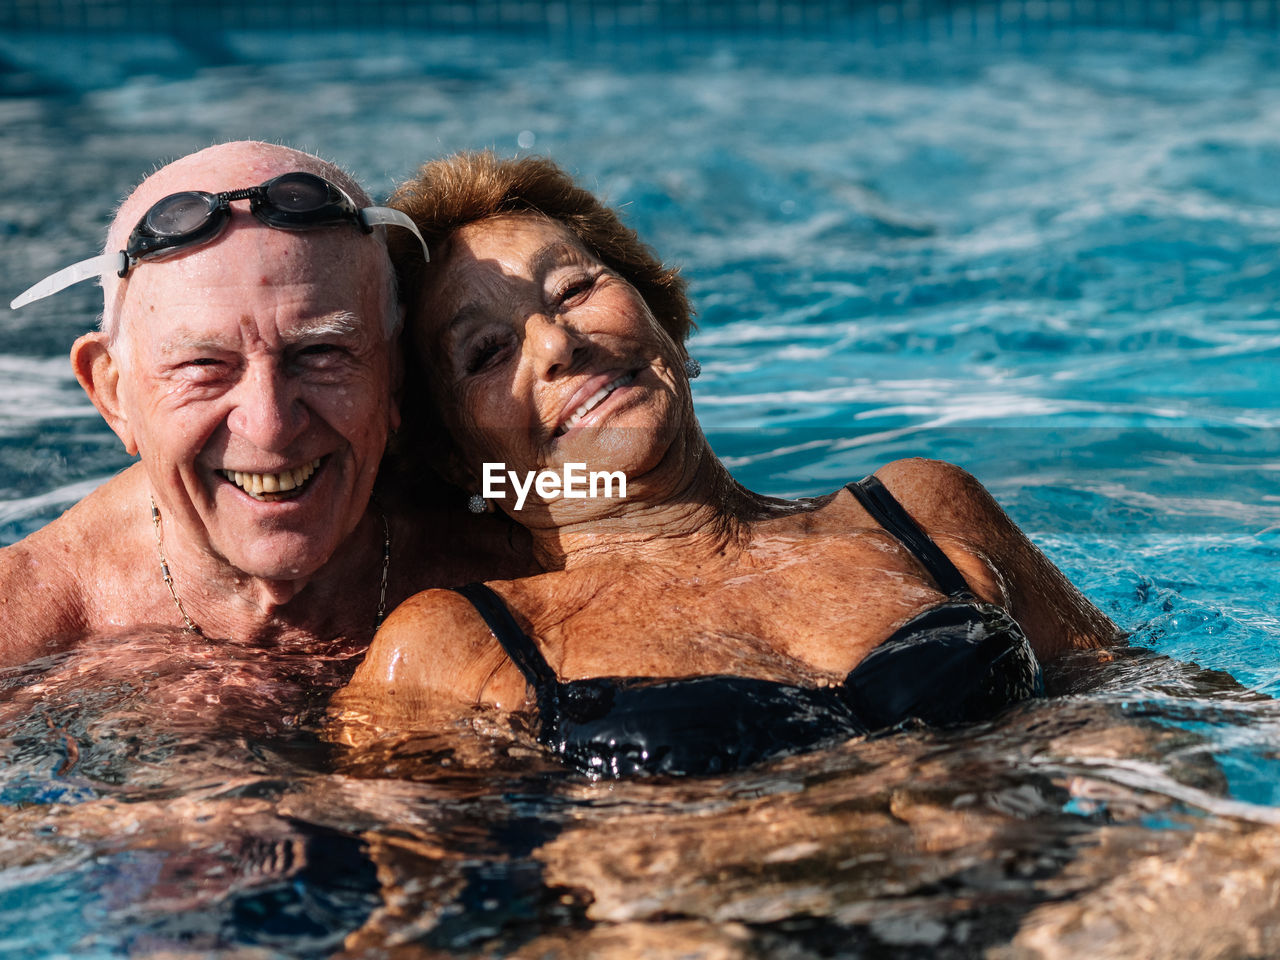 Cheerful senior couple smiling brightly while swimming together in outdoor pool during summer holidays